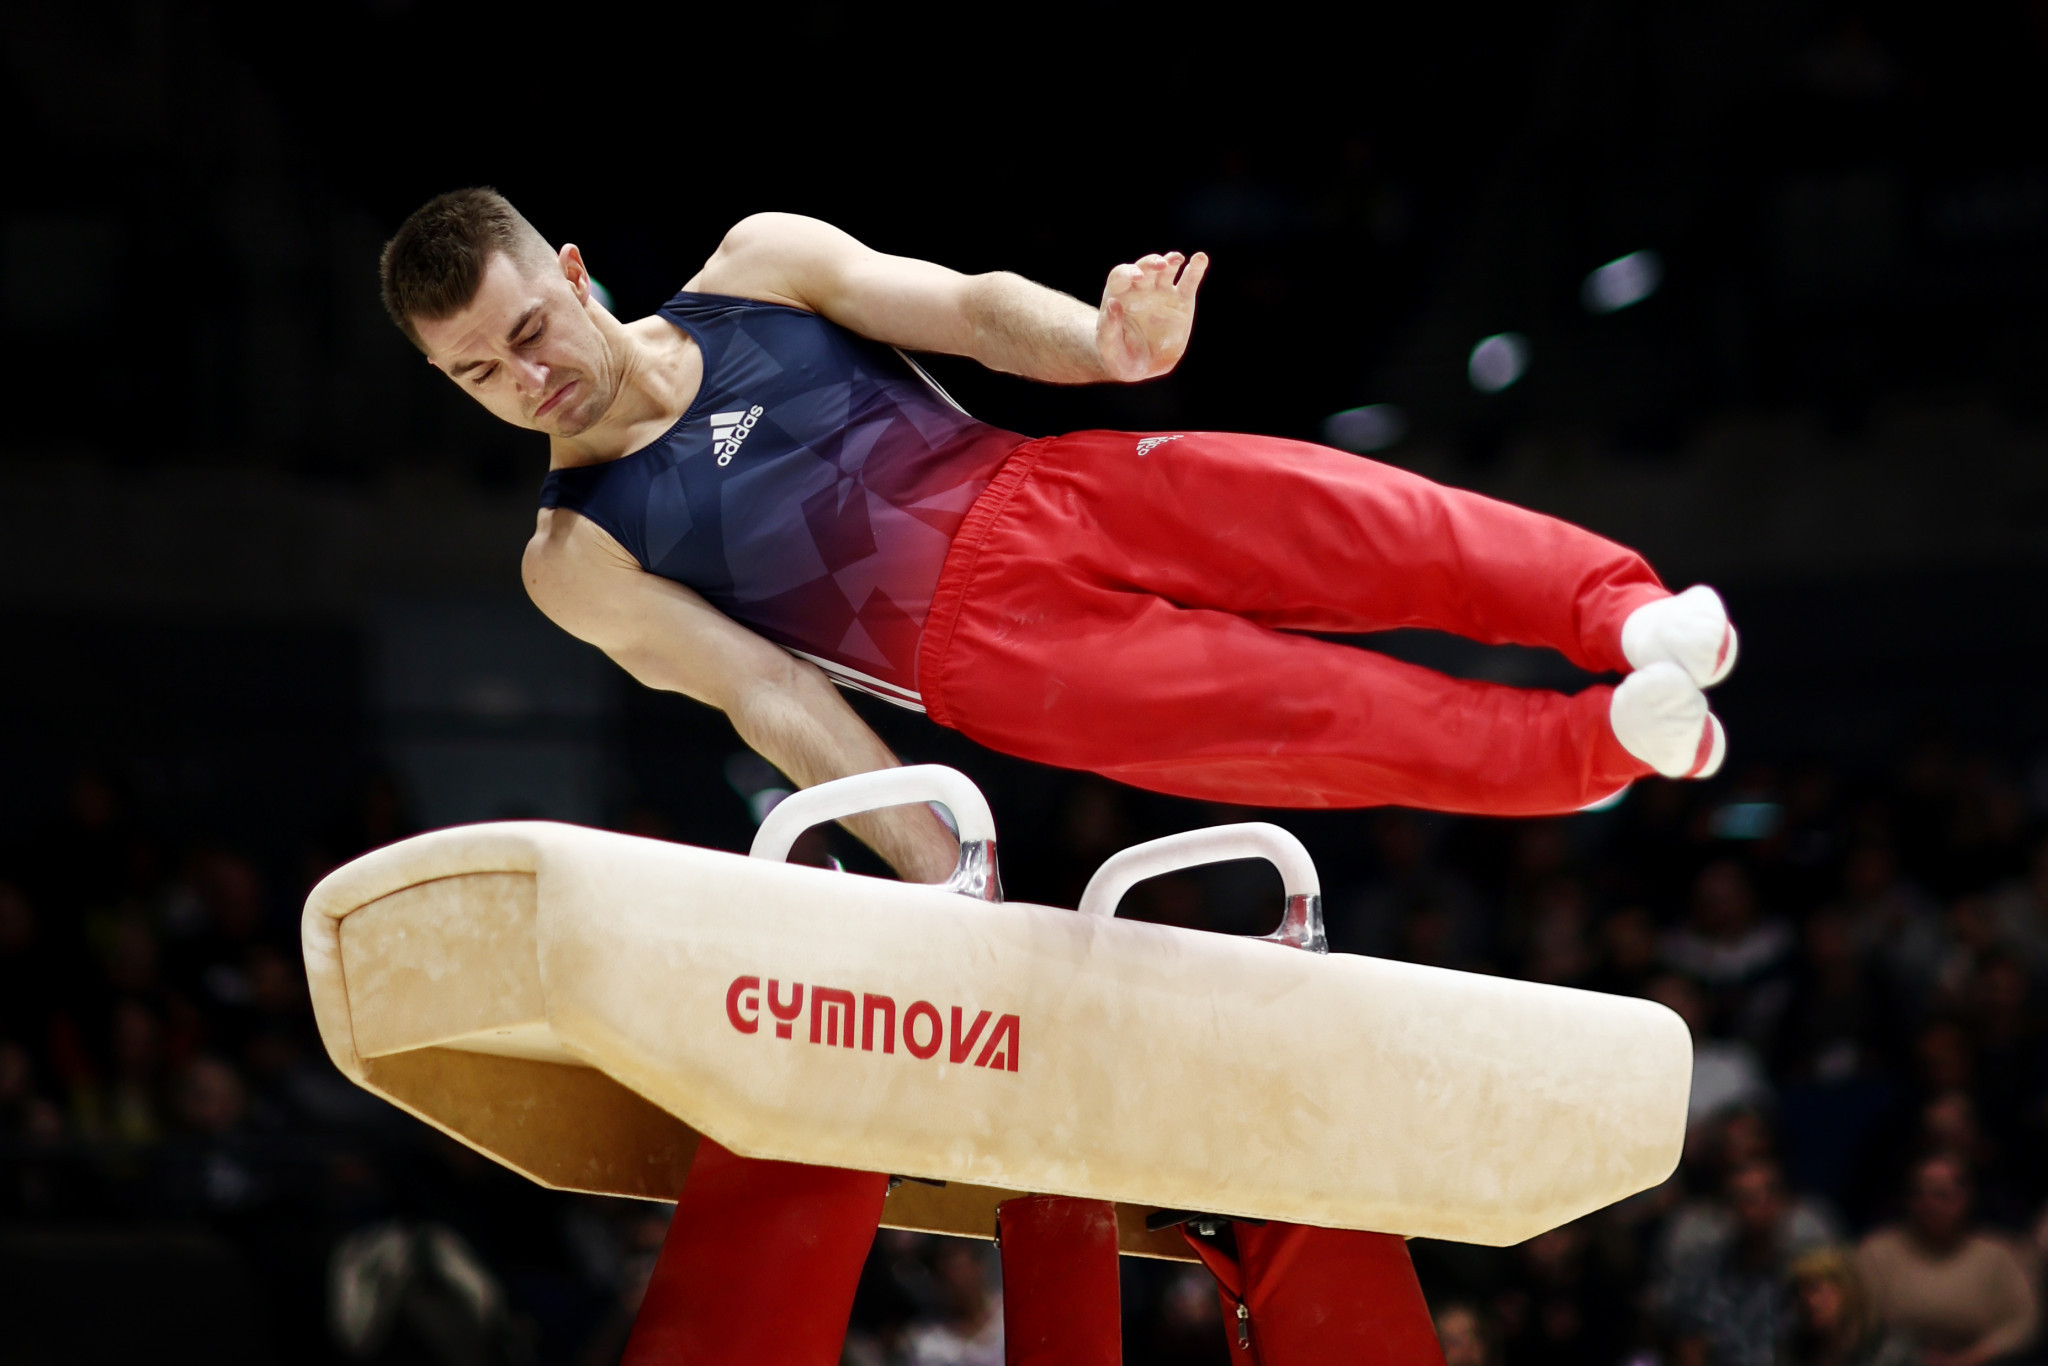 Great Britain's Max Whitlock is gunning for gold at the upcoming Olympic Games in Paris. GETTY IMAGES